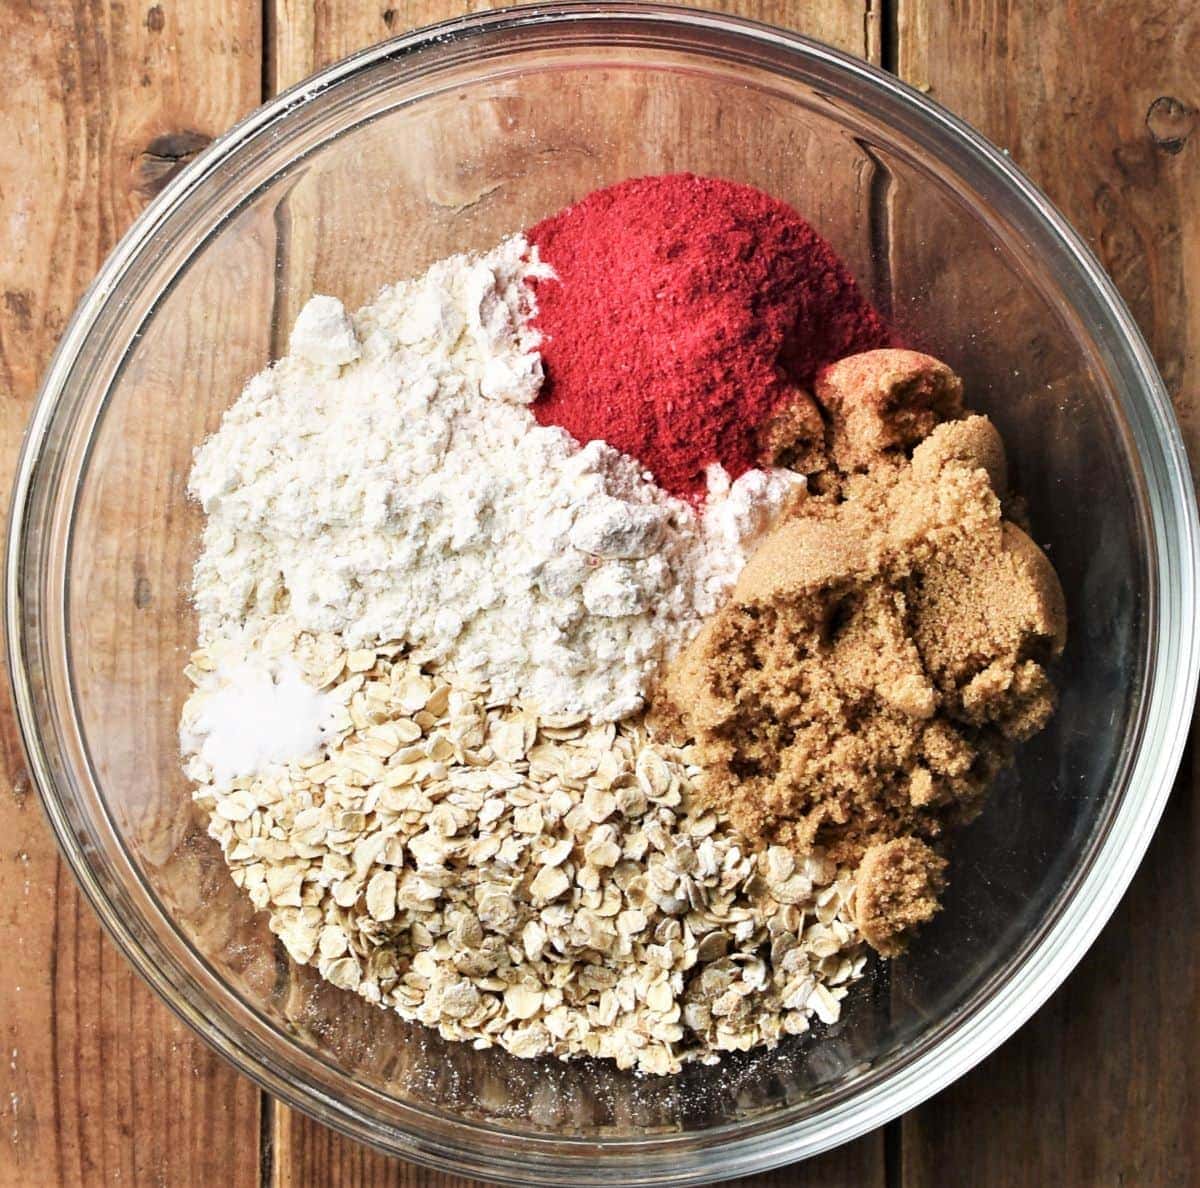 Oats, flour, sugar and raspberry powder in mixing bowl.